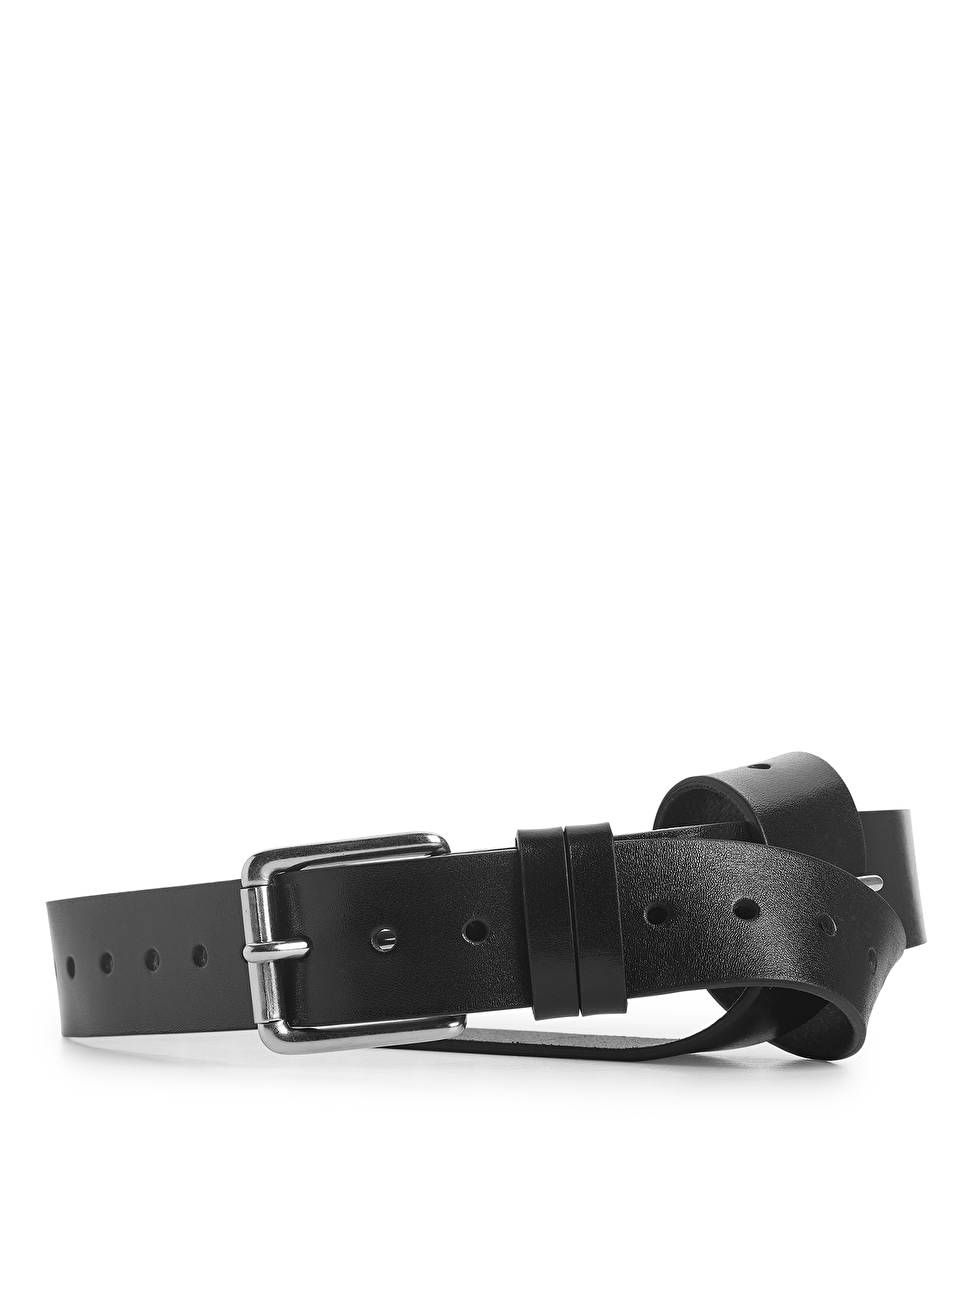 Perforated Leather Belt - Black - Bags & accessories - ARKET GB | ARKET